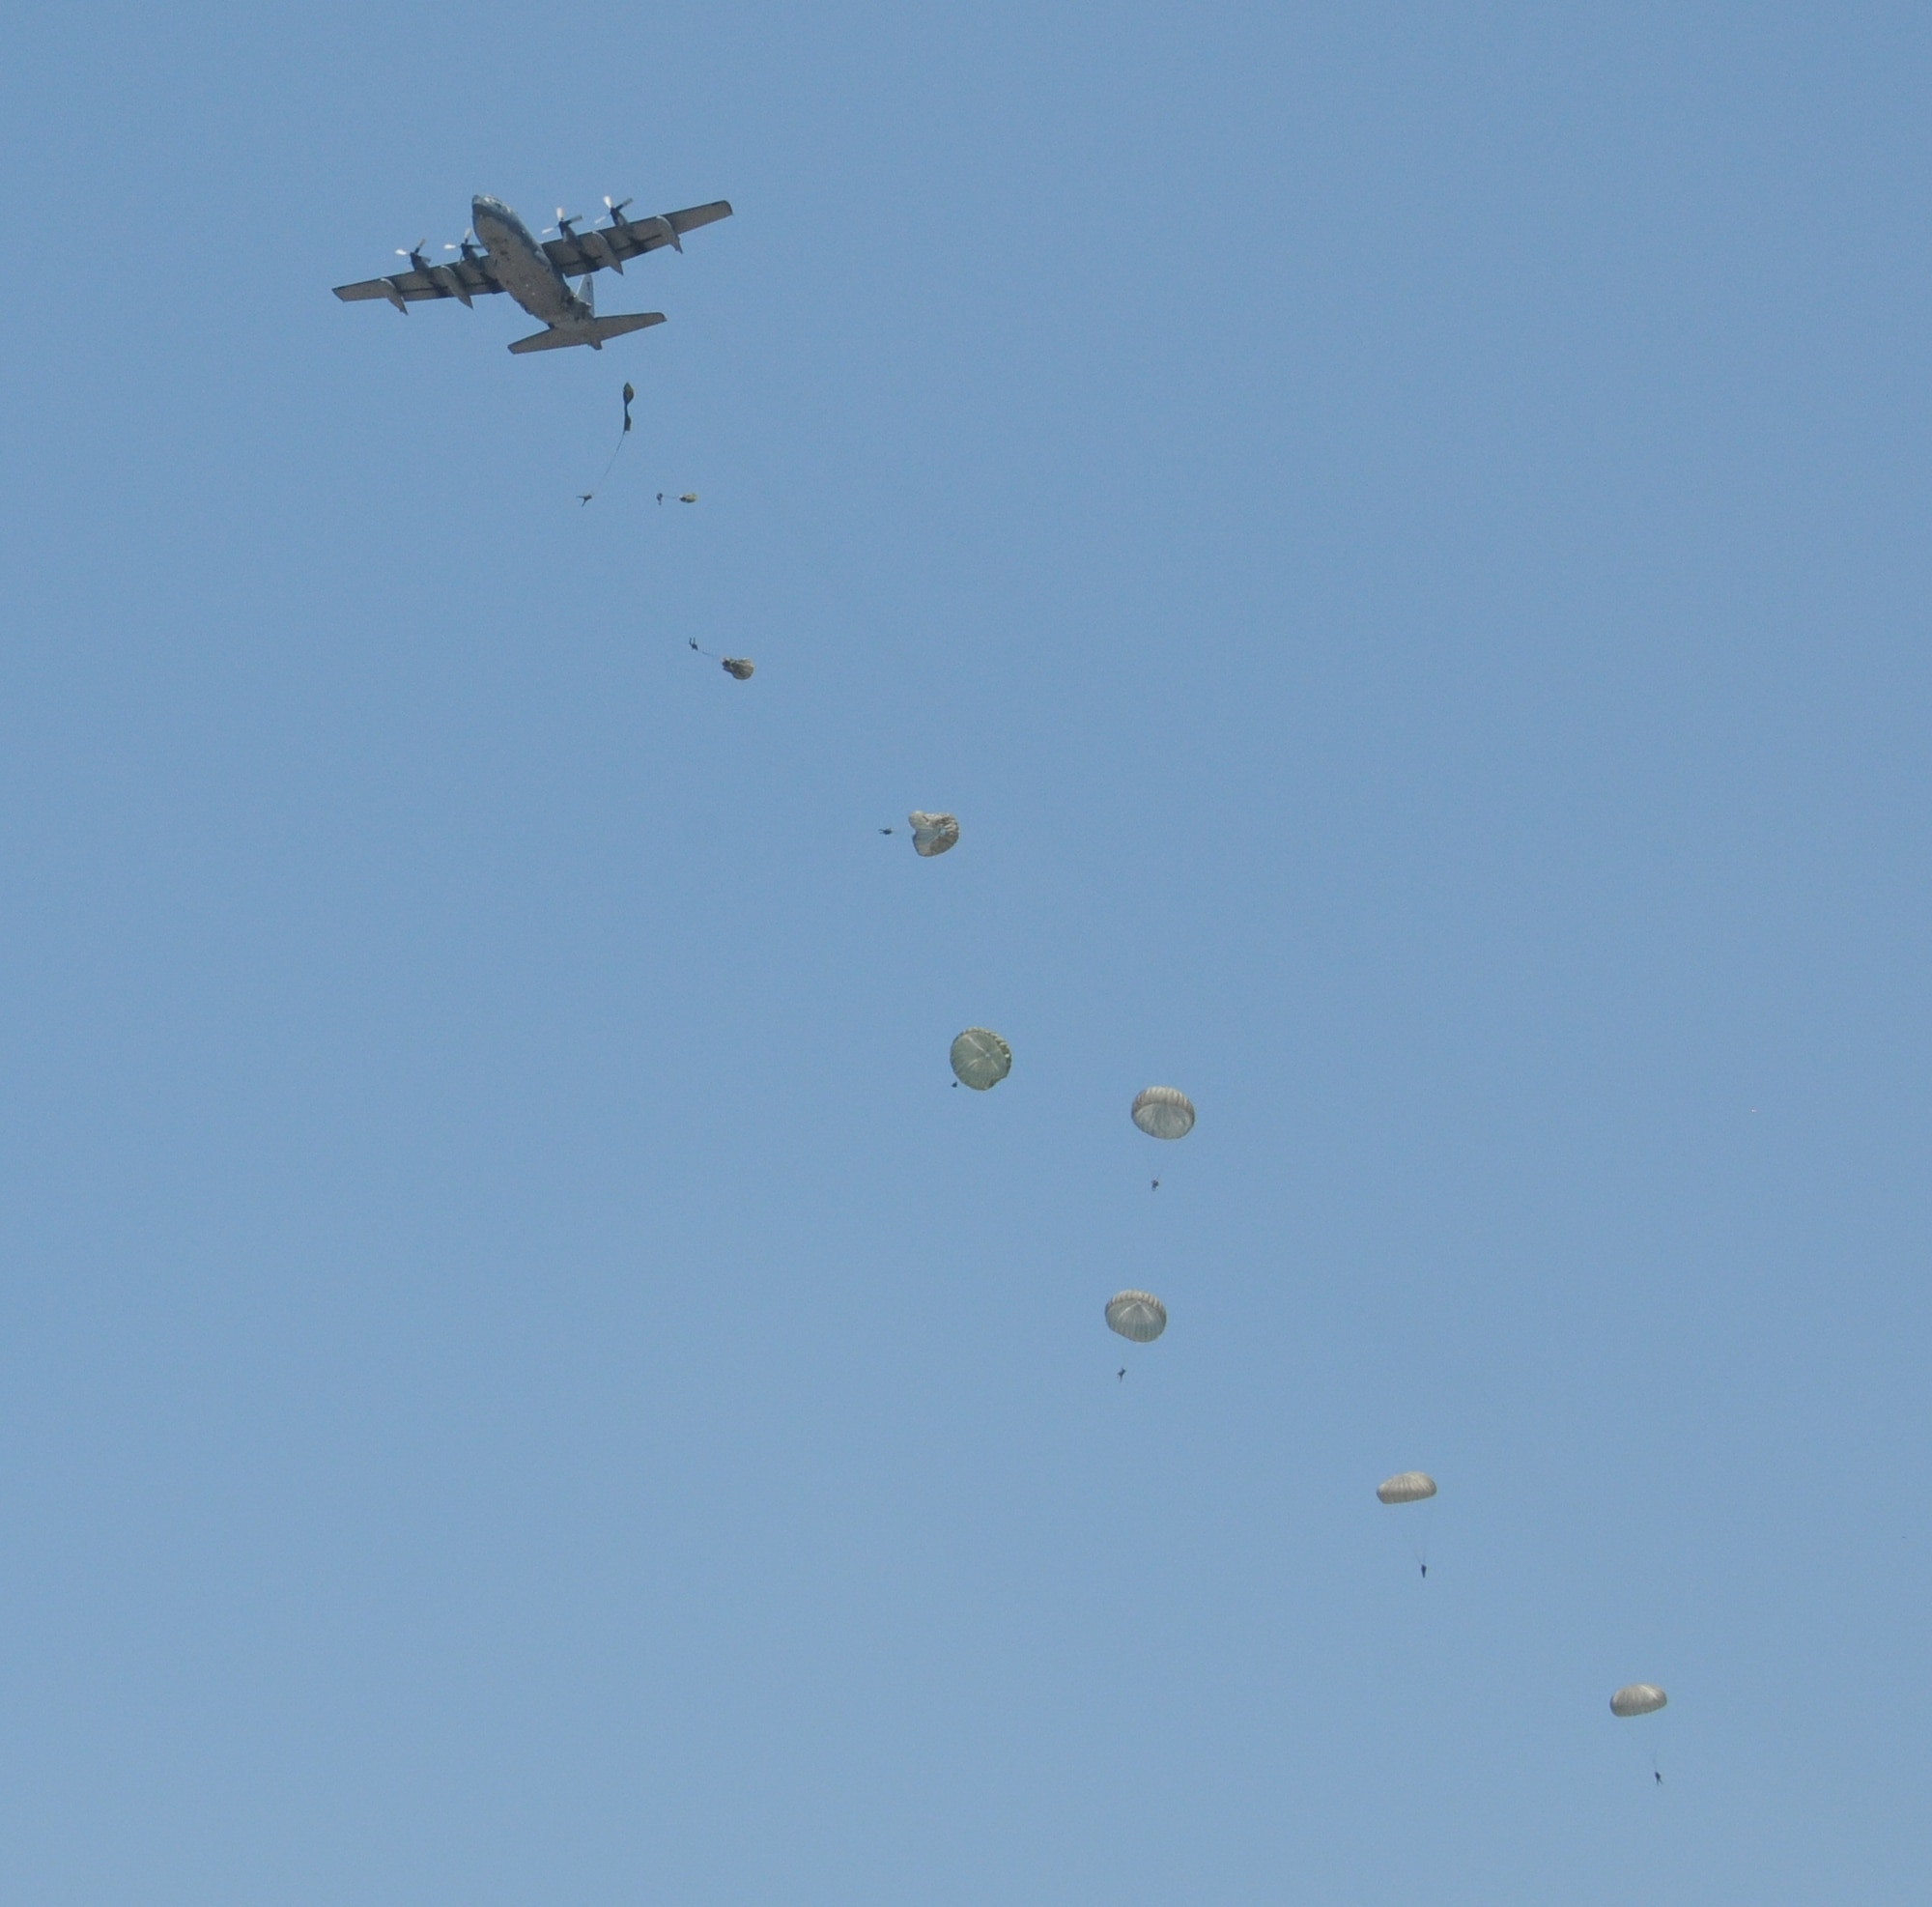 Honduran 2nd Combat Airborne Infantry Battalion paratroopers line the sky after departing a C-130 Hercules aircraft during a joint airborne operations training jump with the 7th Special Forces Group at Soto Cano Air Base, Honduras on April 3, 2014.  The 1,500 foot static line jump allowed members from both nations to retain currency, while also strengthening the relationship between the U.S. and Honduran forces.  (Photo by U. S. Air National Guard Capt. Steven Stubbs)